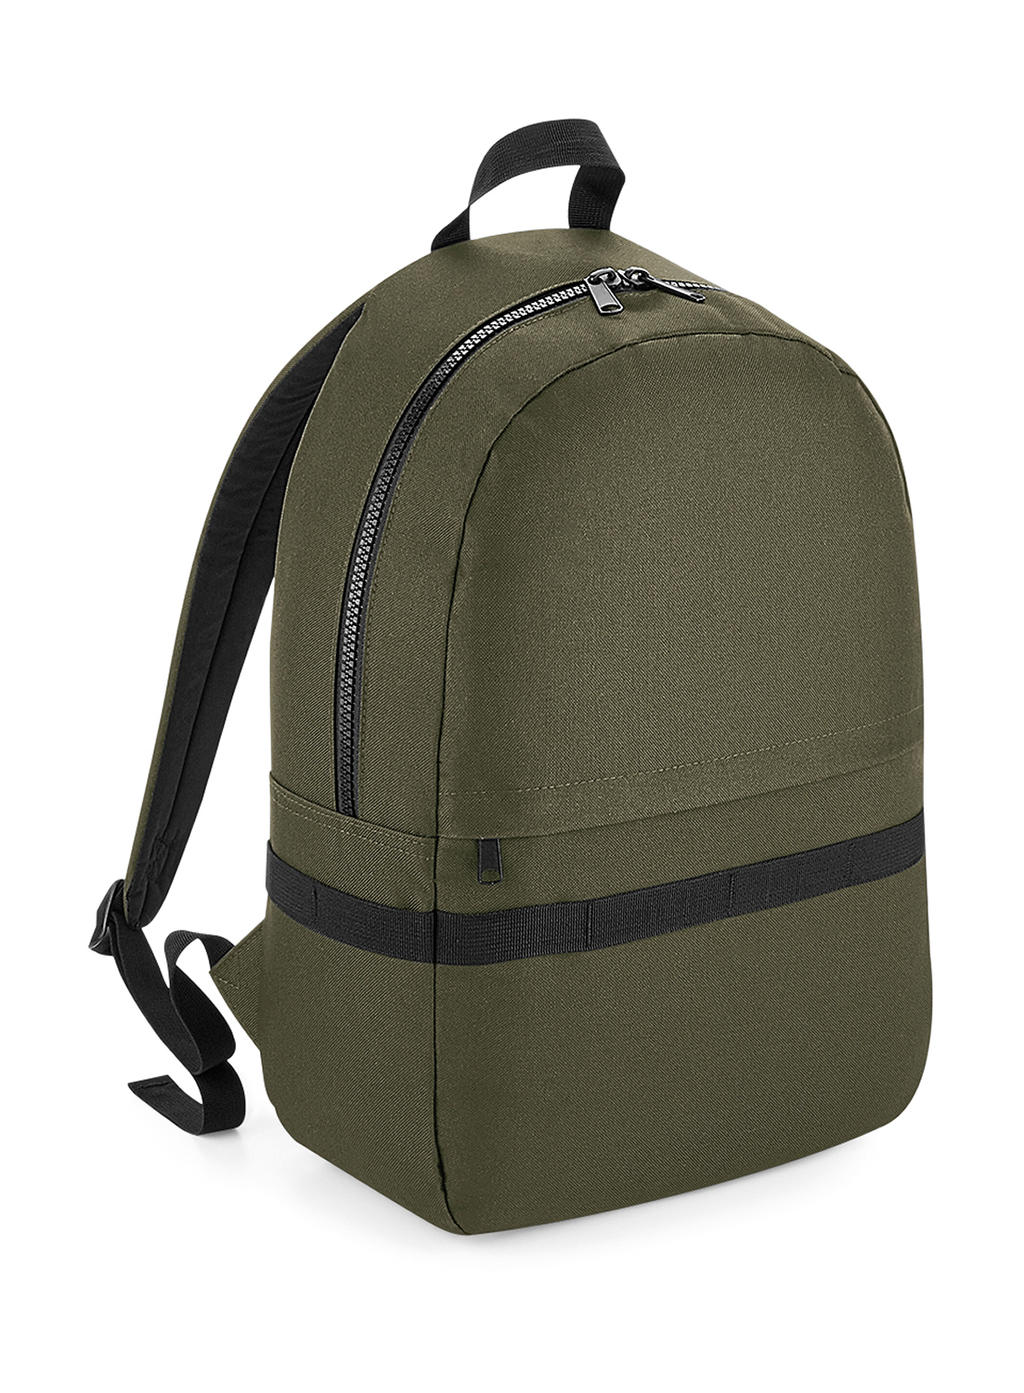  Modulr? 20 Litre Backpack in Farbe Military Green